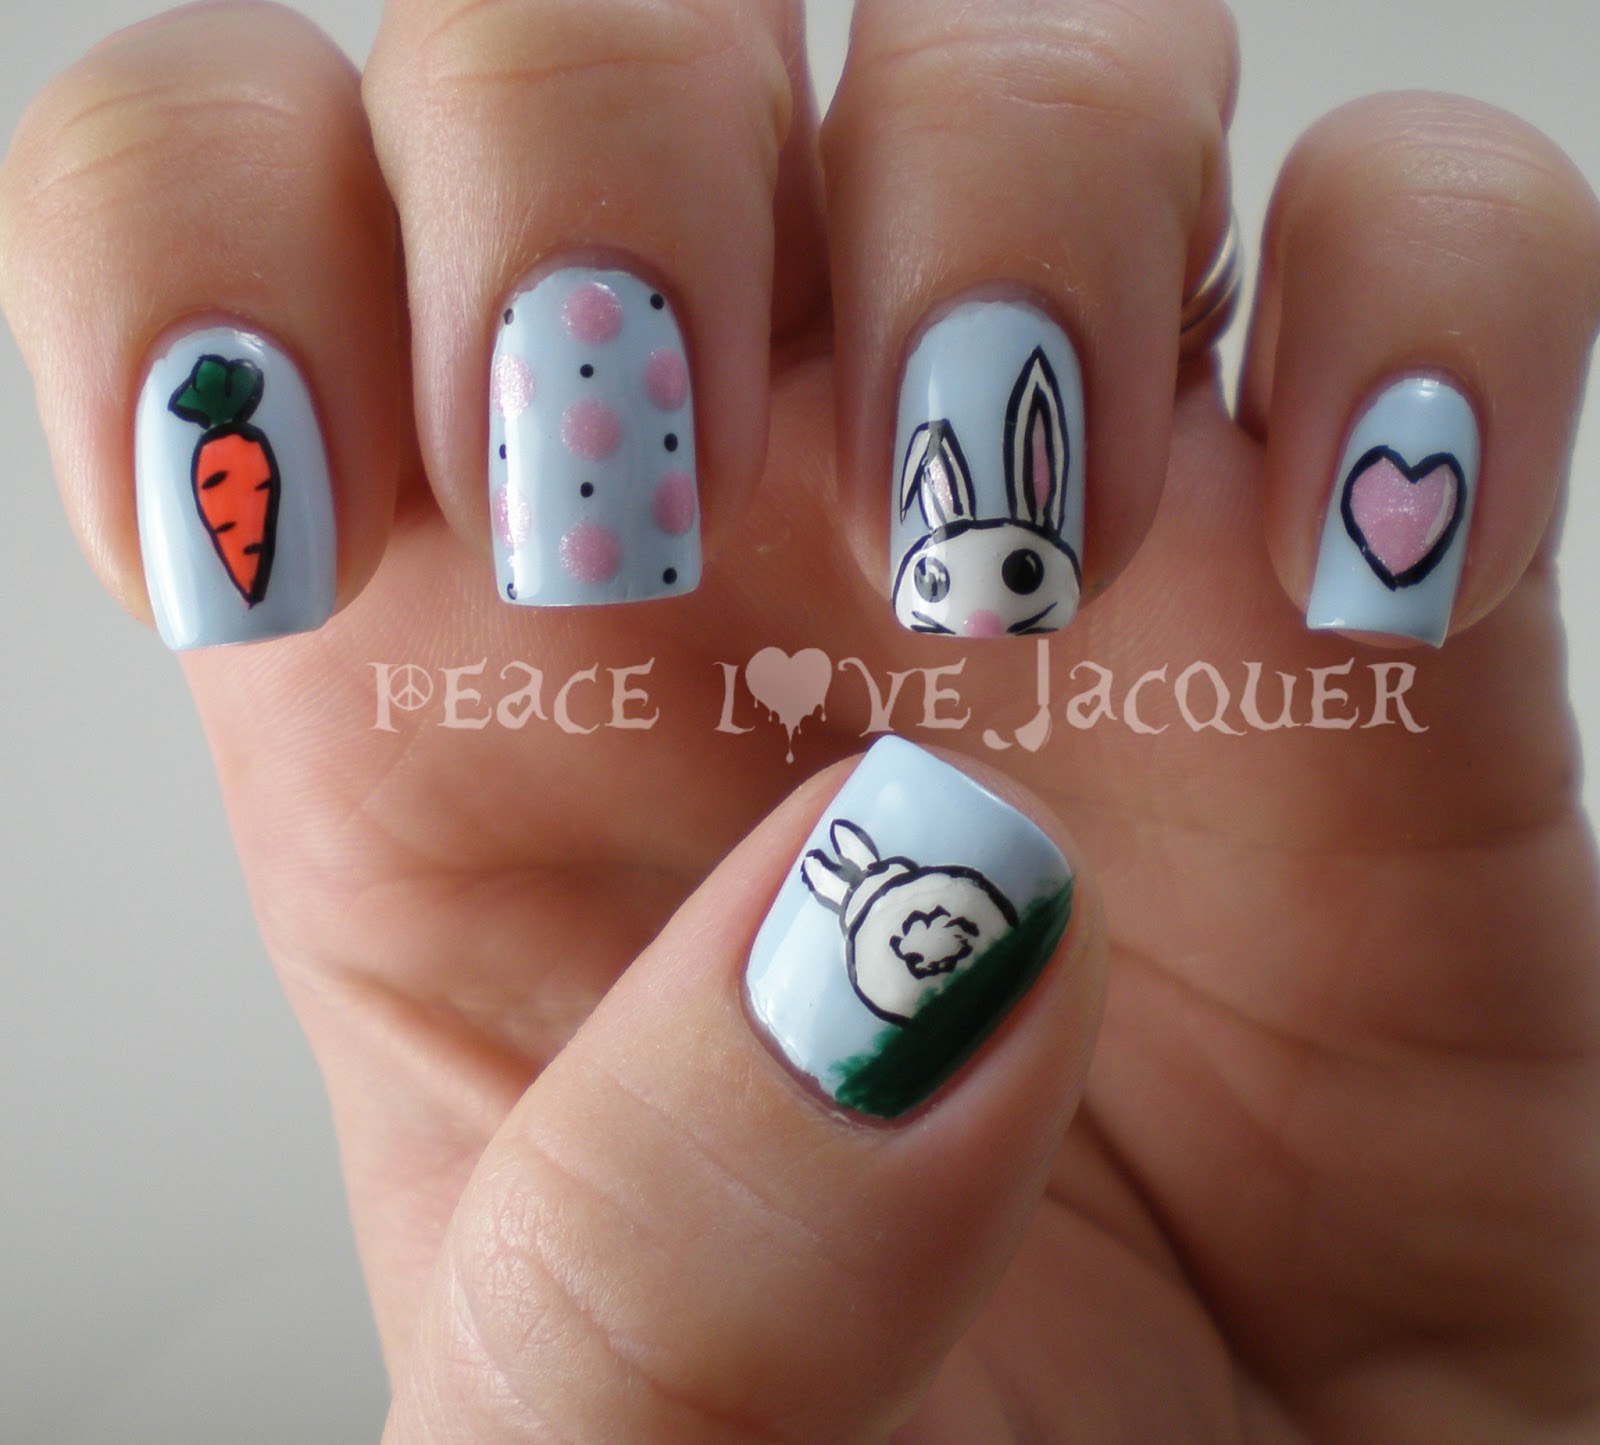 Peace Love Lacquer: Easter Nail Art Challenge Day 2 - Bunnies